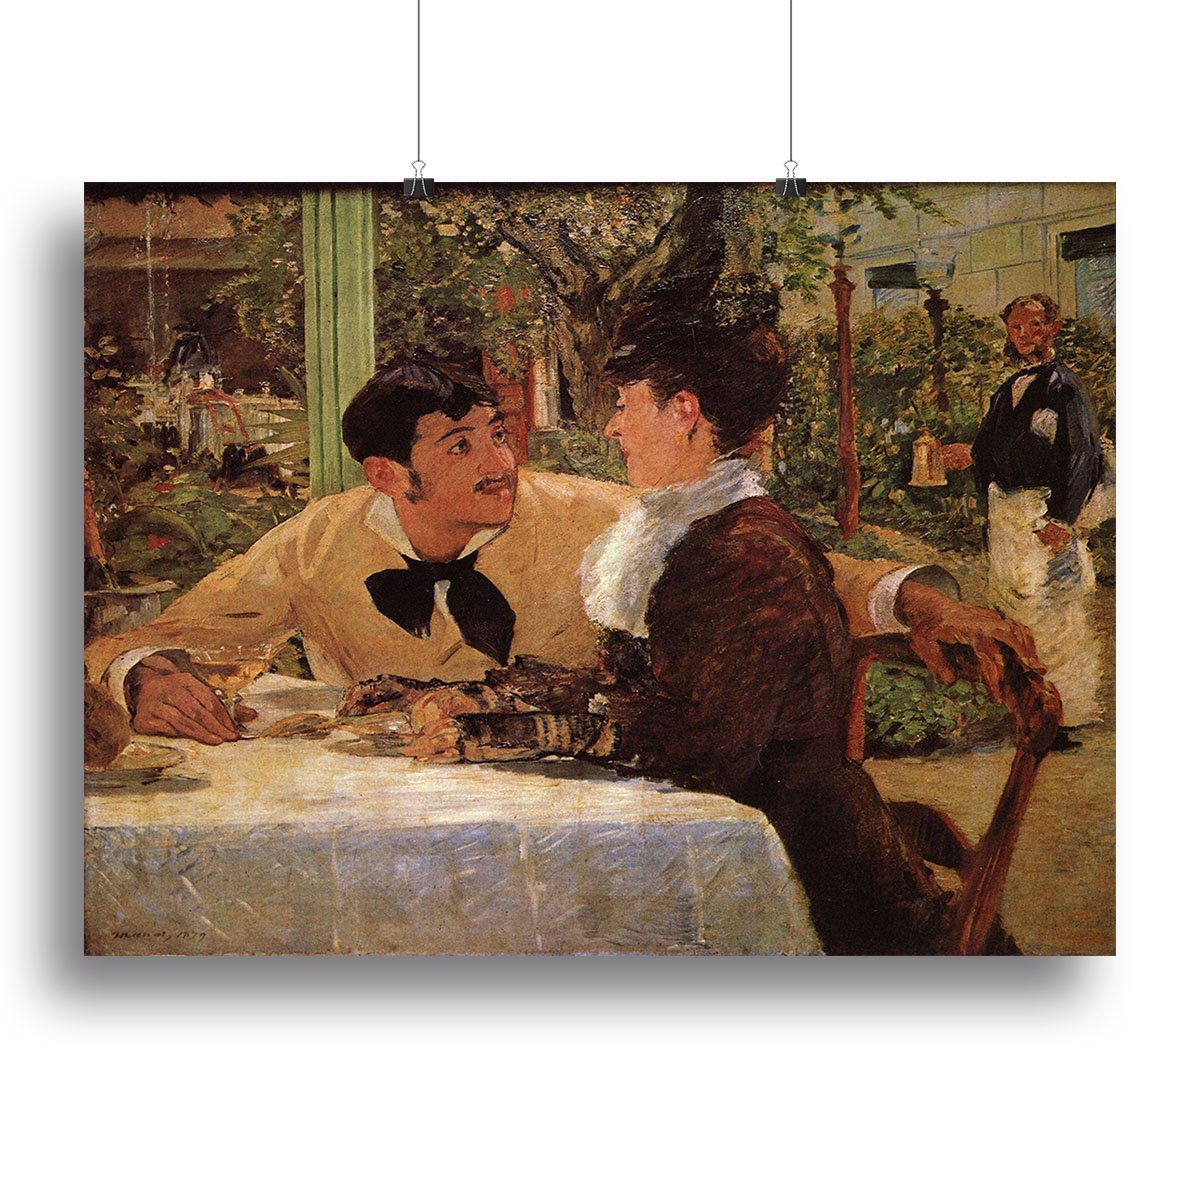 Pare Lathuille by Manet Canvas Print or Poster